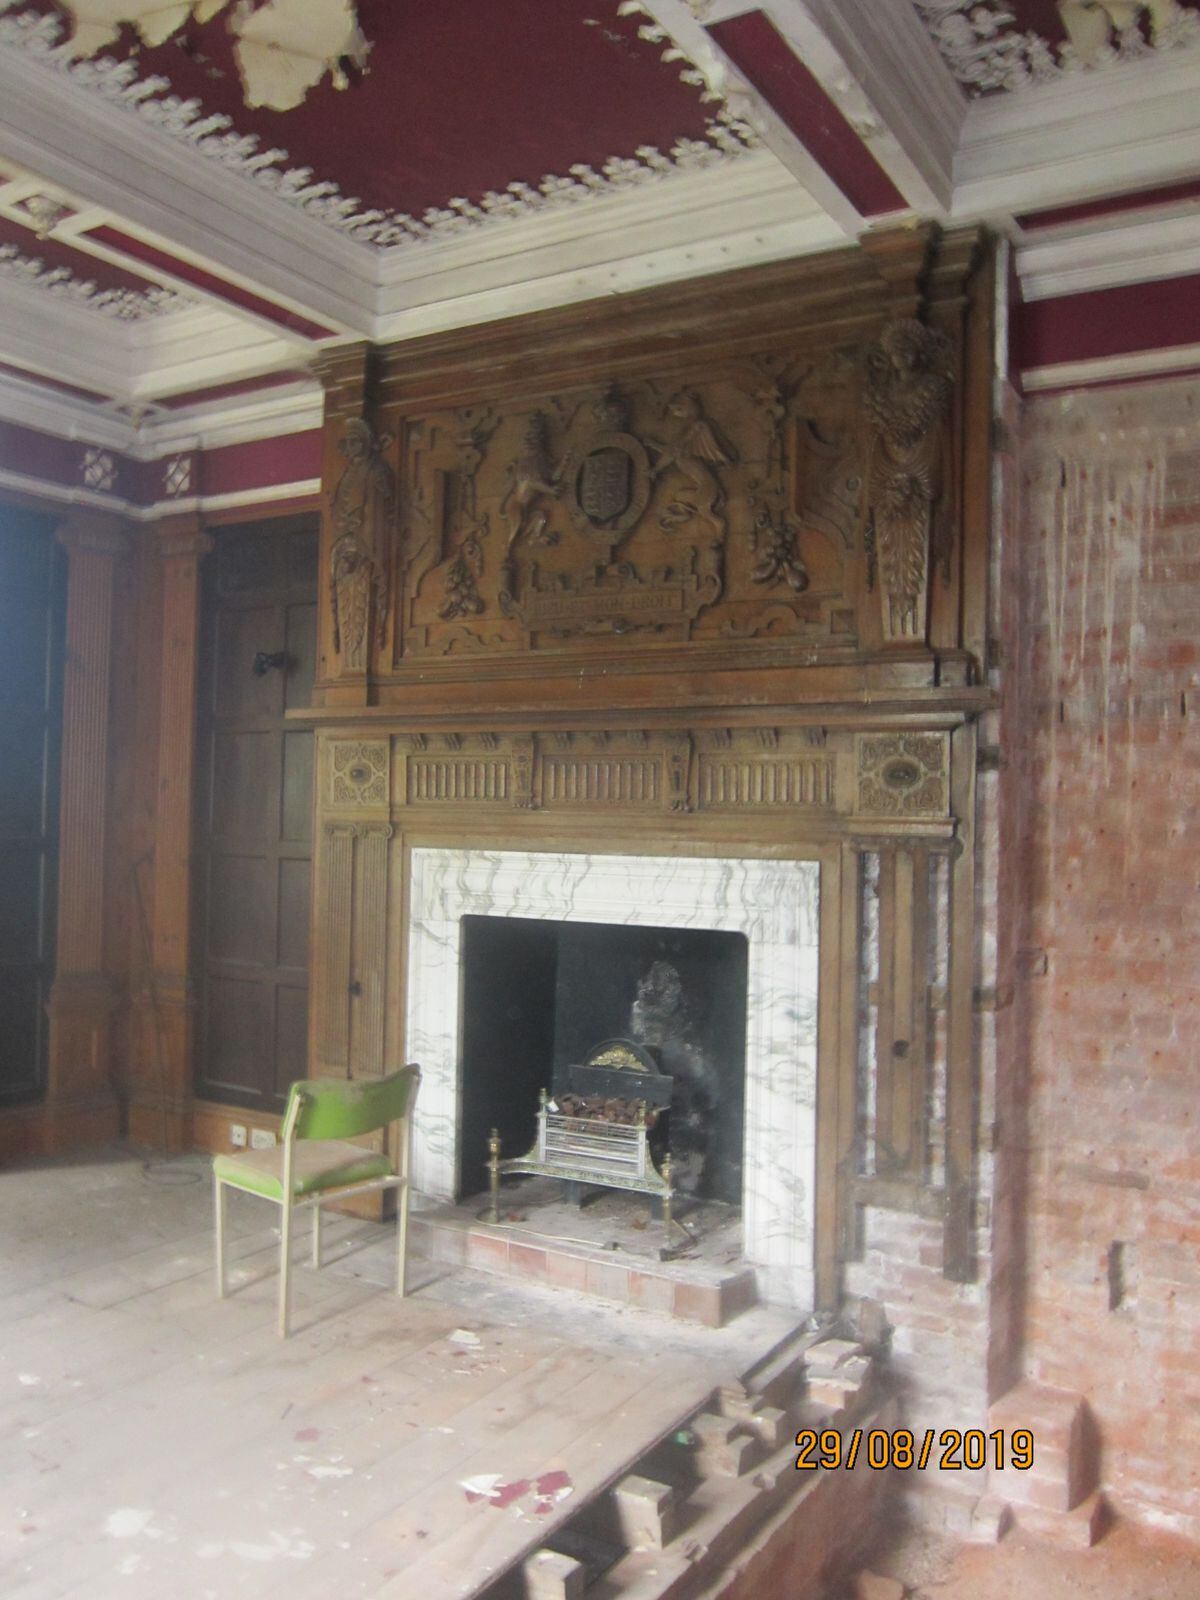 The overmantel in place at Seighford Hall. Photo courtesy of Stafford Borough Council.